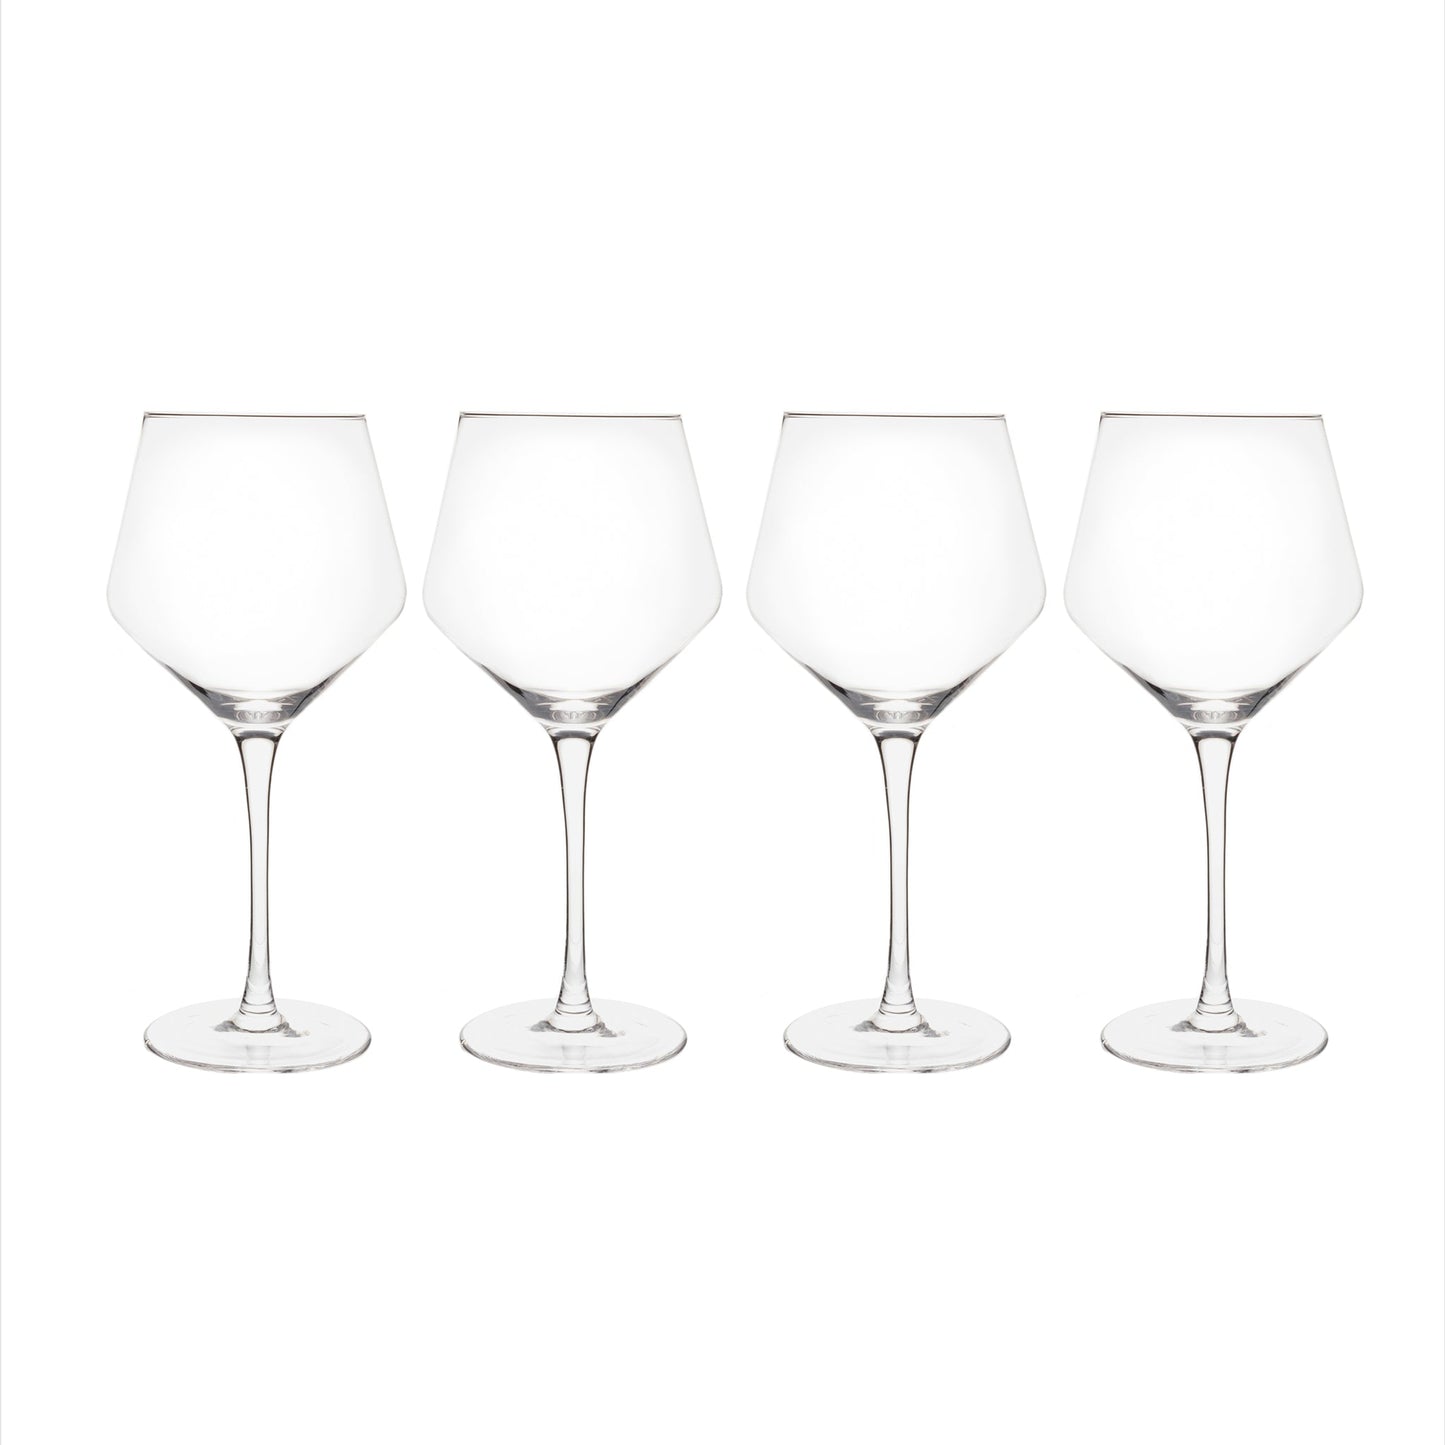 Set of 4 Red Wine Glasses - 23 Oz by Creative Gifts